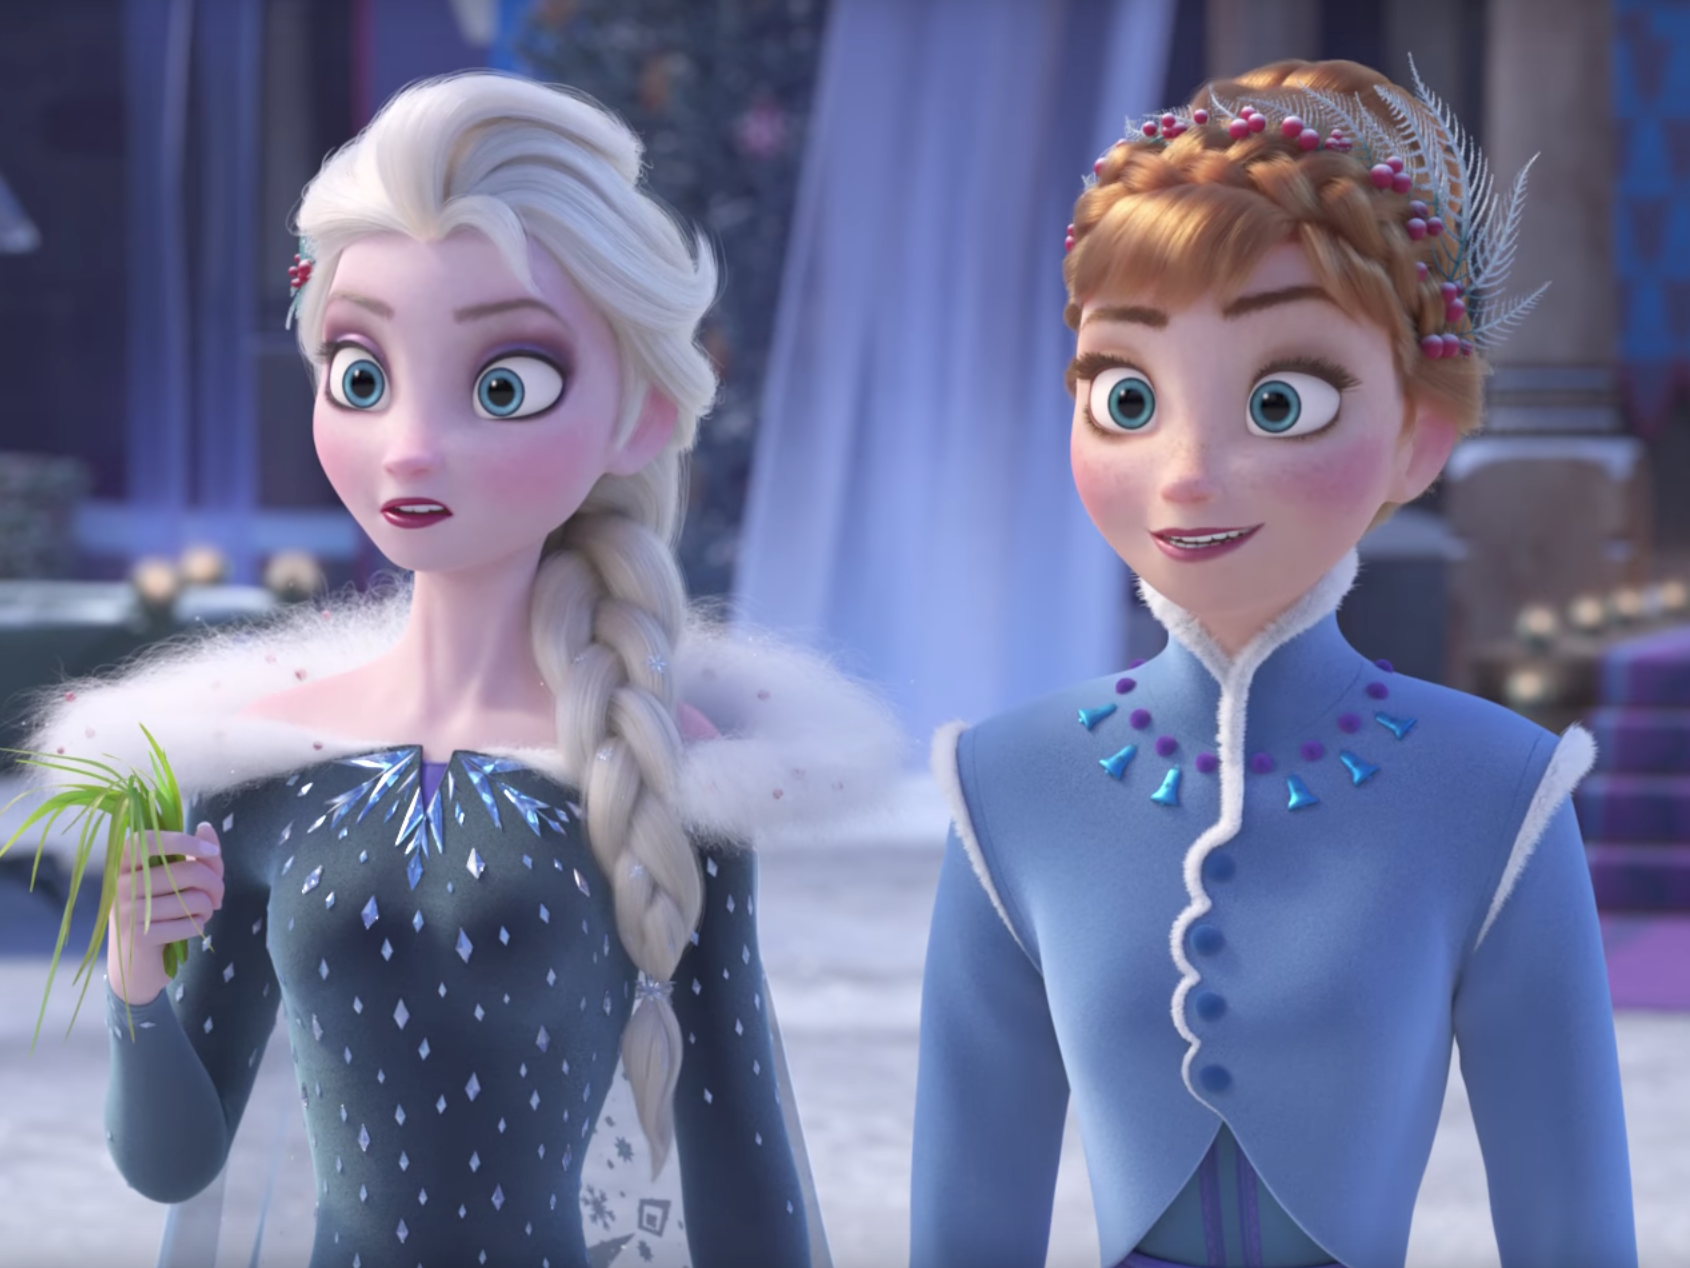 A new 'Frozen' short 'Olaf's Frozen Adventure' is coming to theaters ...